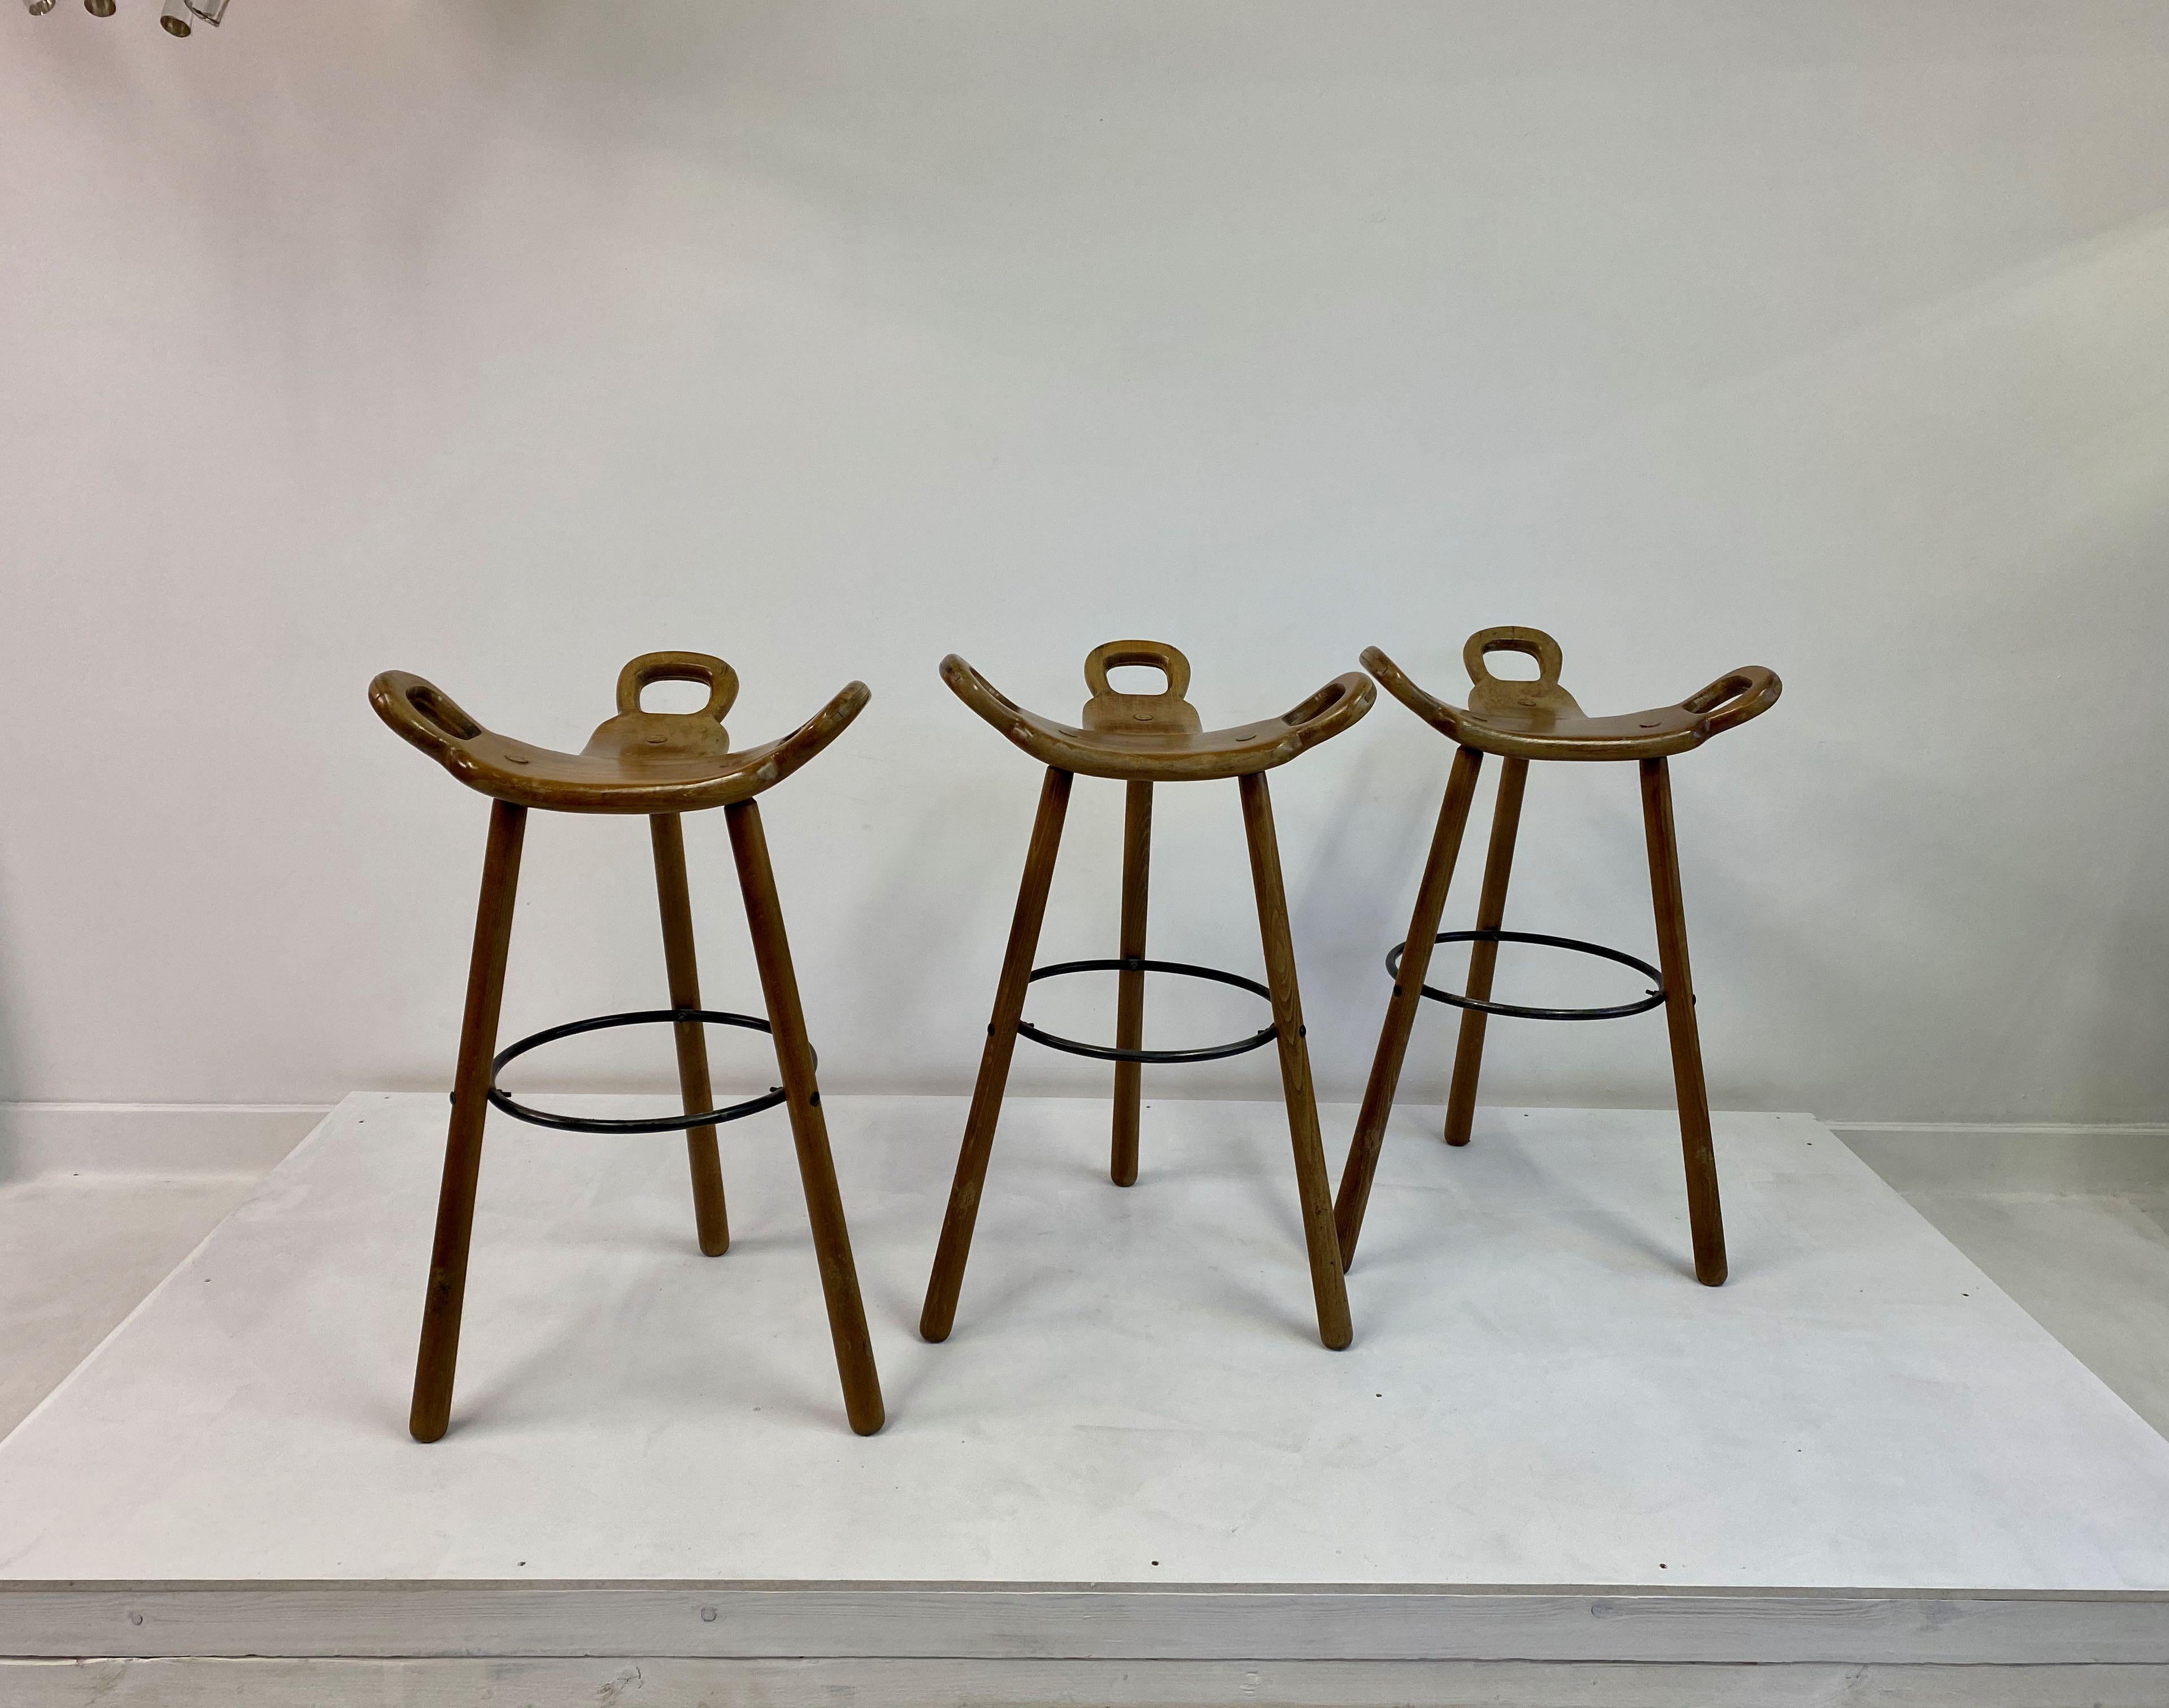 Set of three Brutalist or Marbella stools

Solid patinated beech

Three legged frame

Saddle shaped seat

Spain, 1970s.